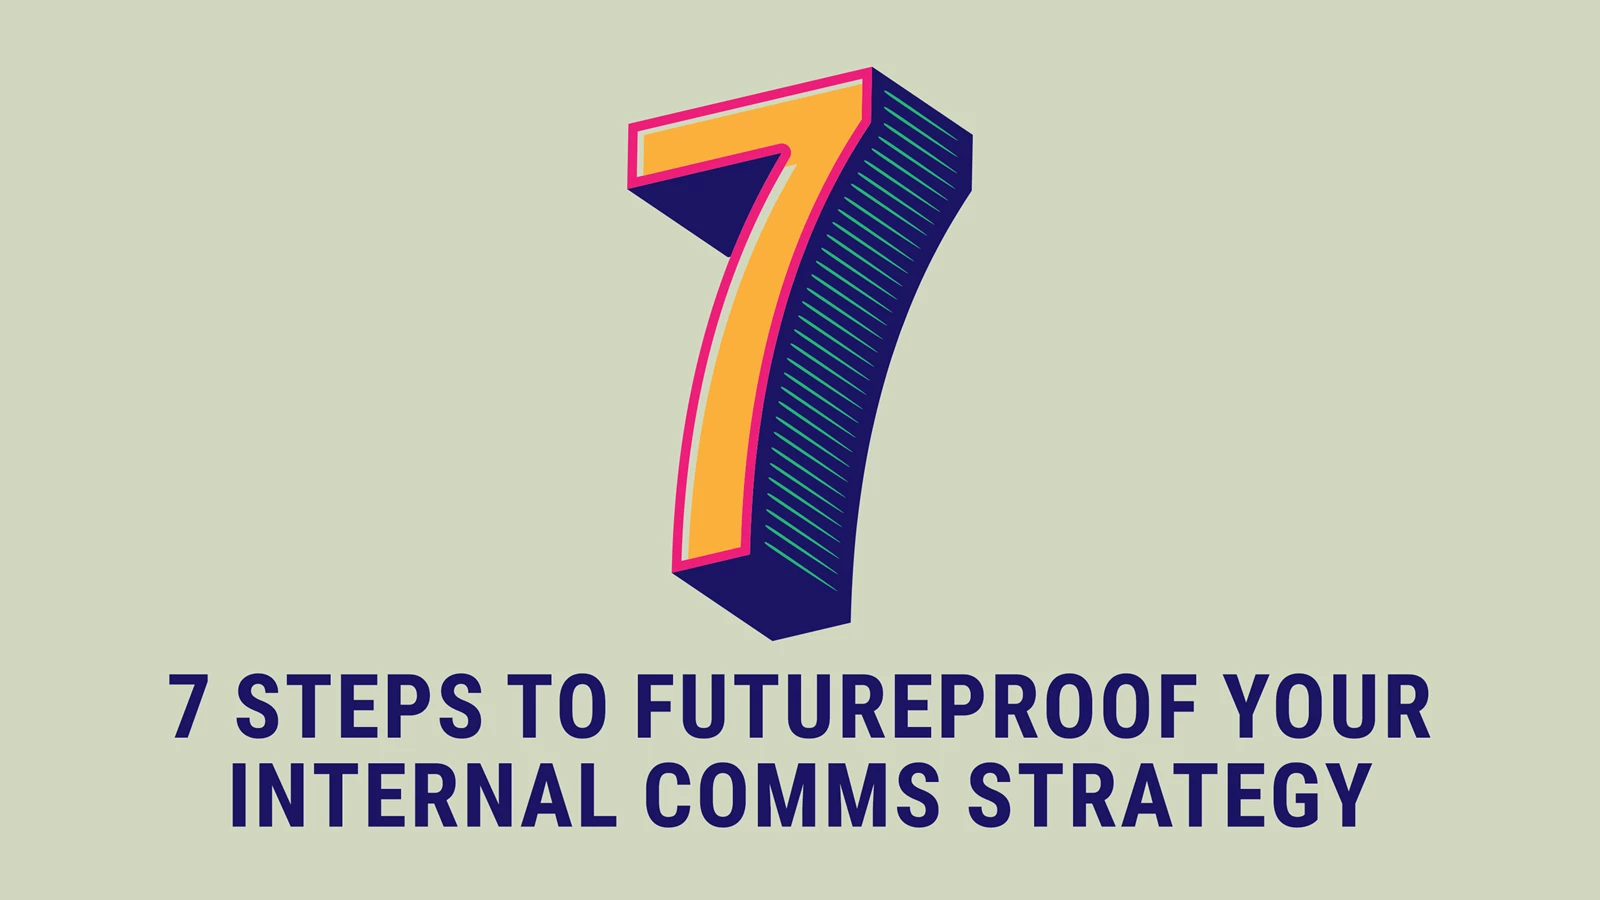 Internal communications strategy guide front cover